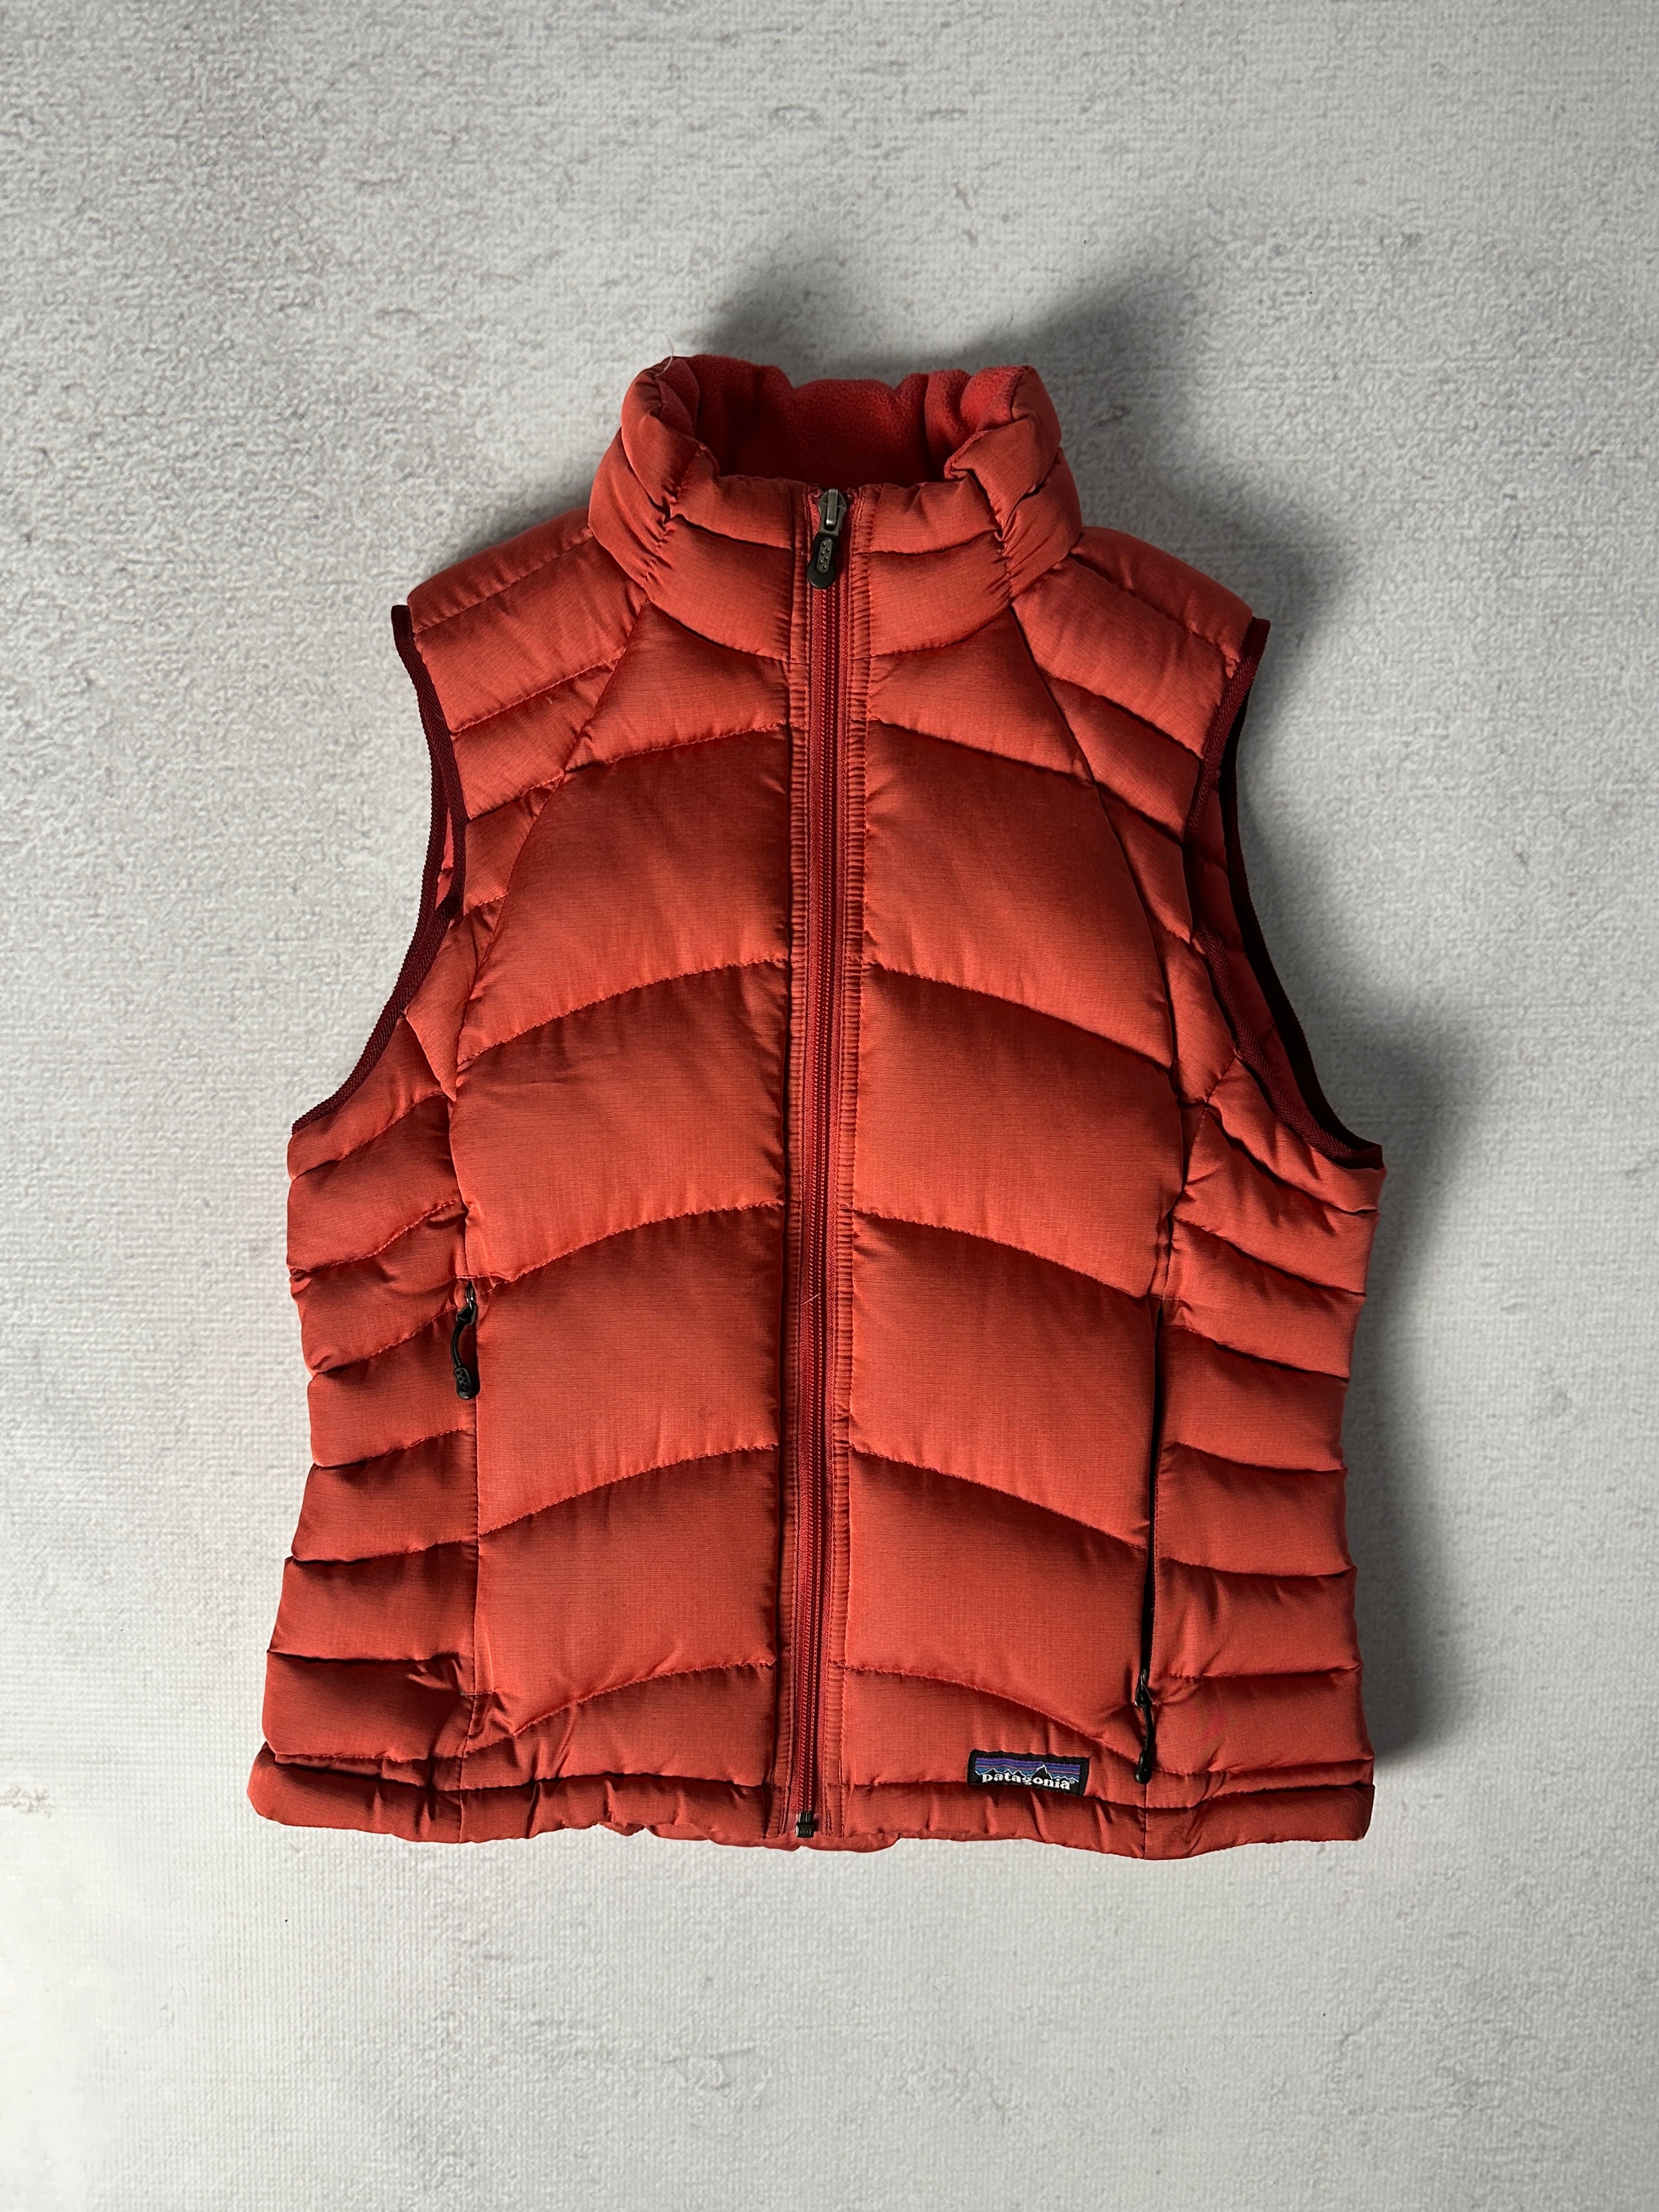 Vintage Patagonia Puffer Vest - Women's Small